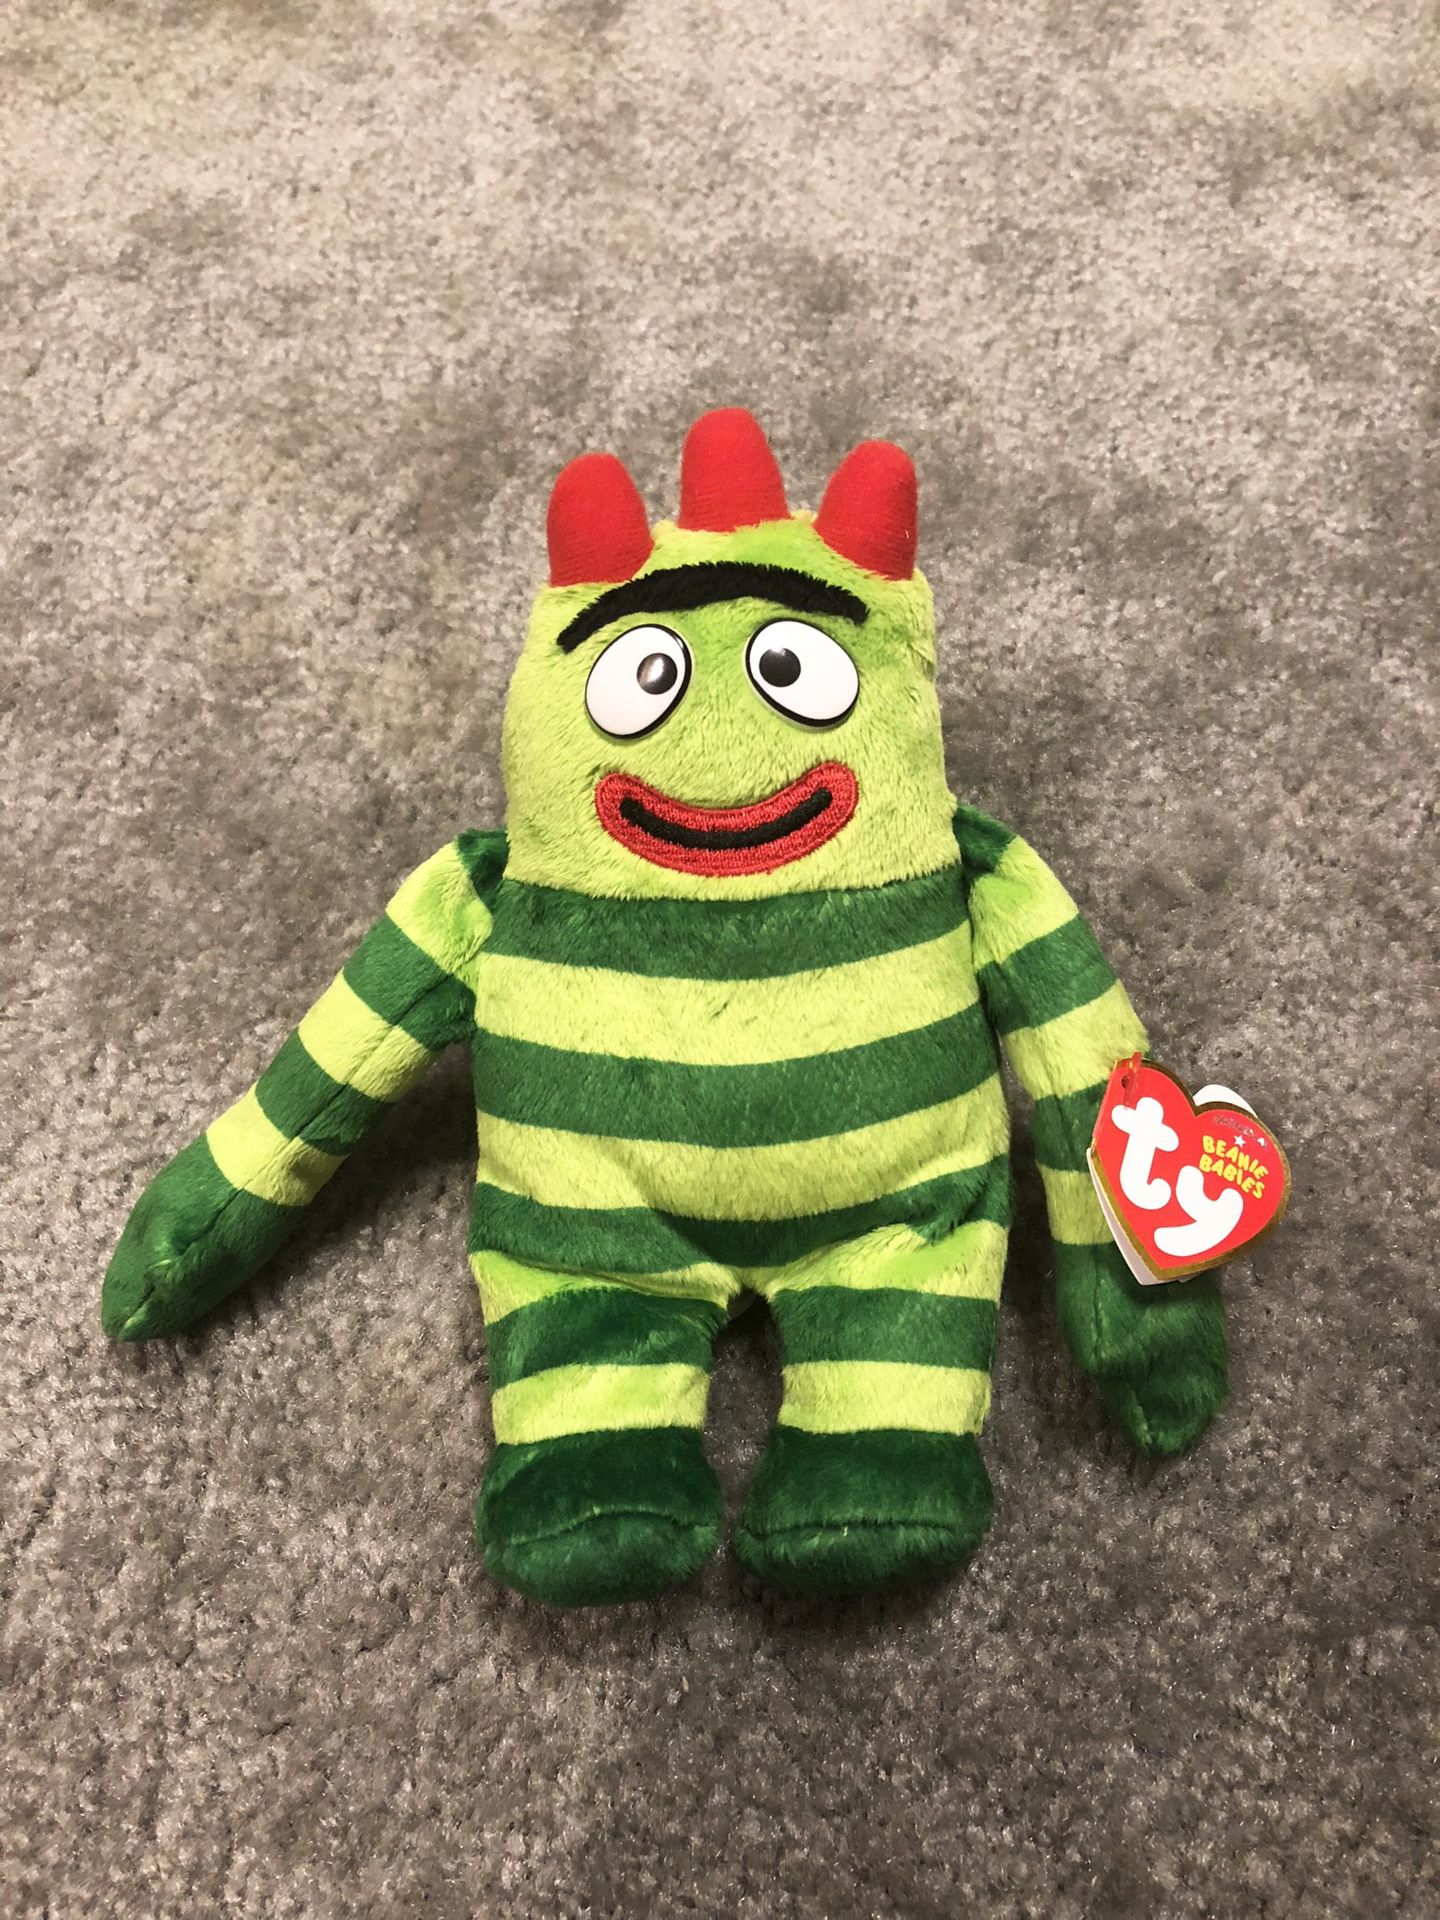 Yo Gabba Gabba 12' inch Talking Brobee Plush and Beanie Ballz (Price is for  all) for Sale in PA, US - OfferUp